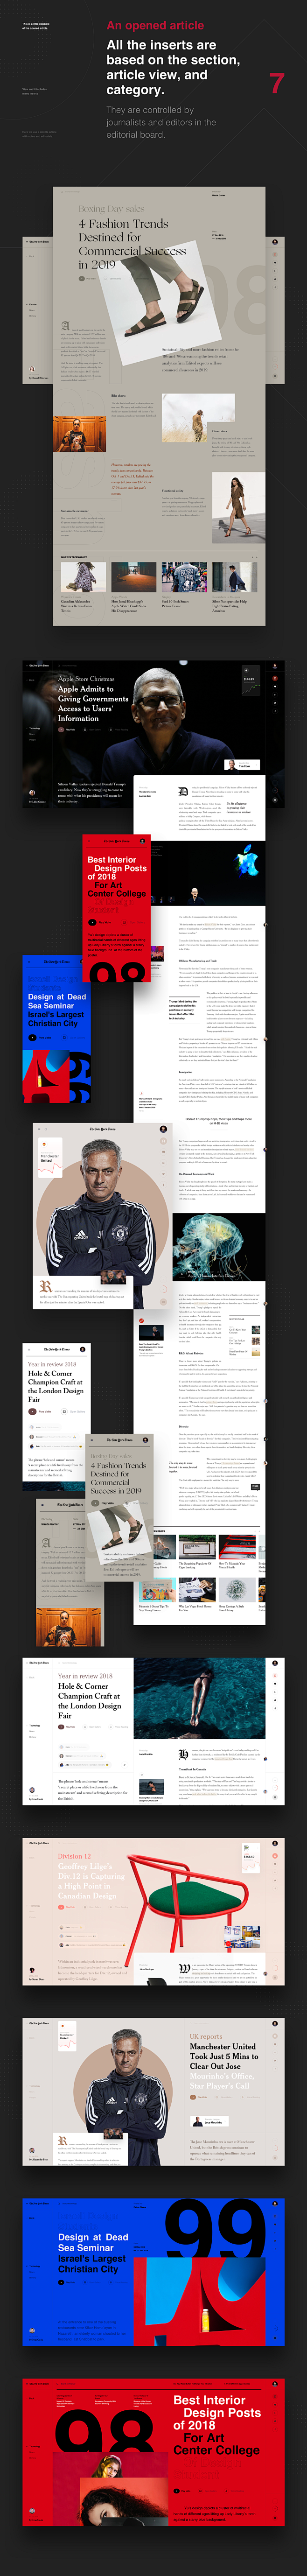 NYT Redesign Concept...